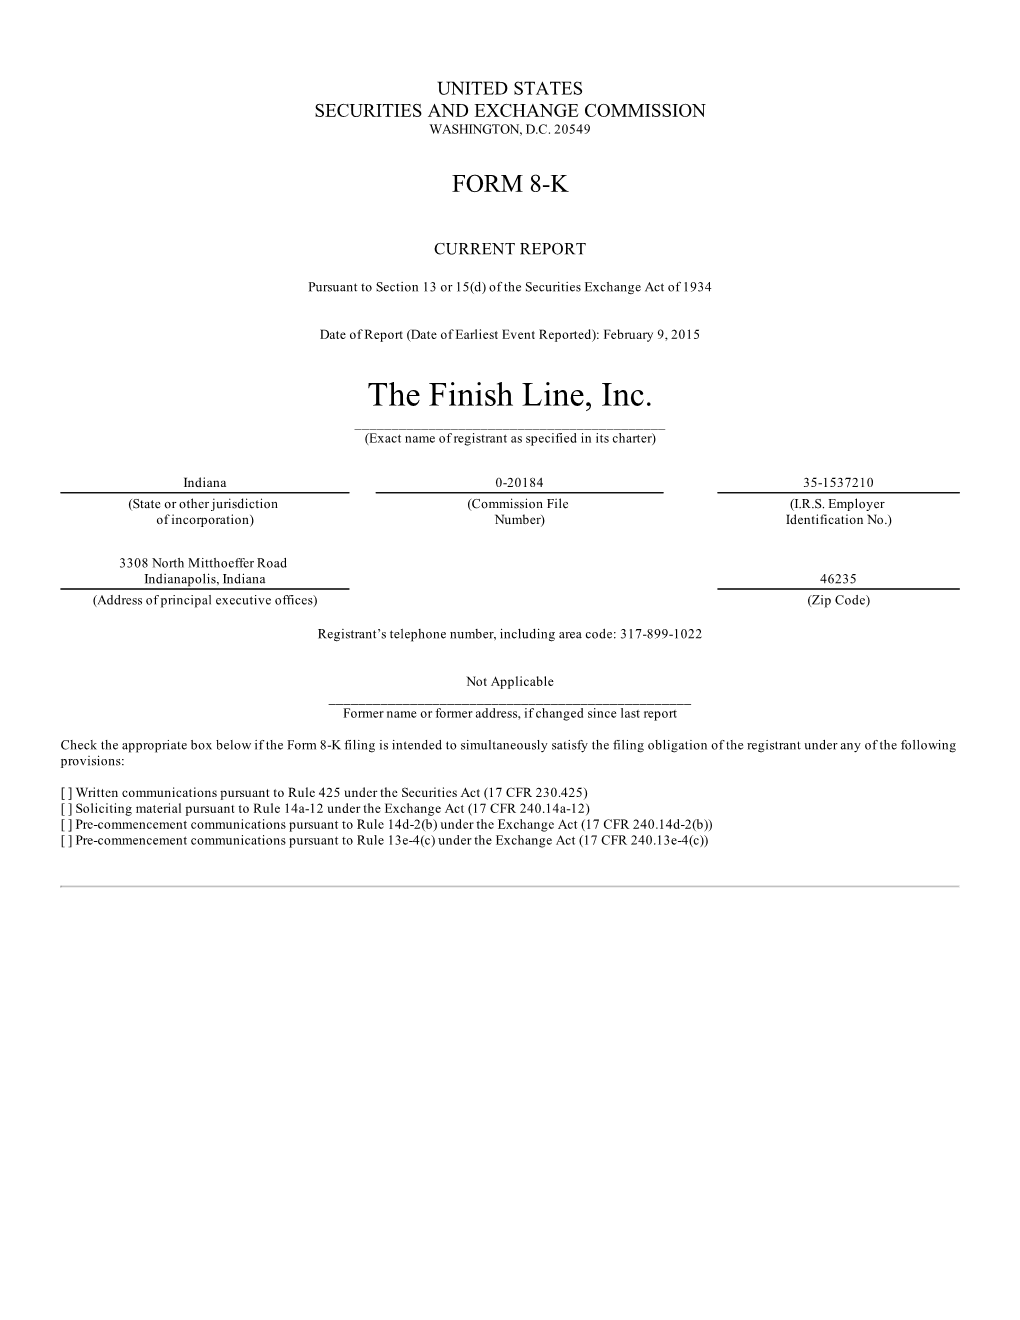 The Finish Line, Inc. ______(Exact Name of Registrant As Specified in Its Charter)